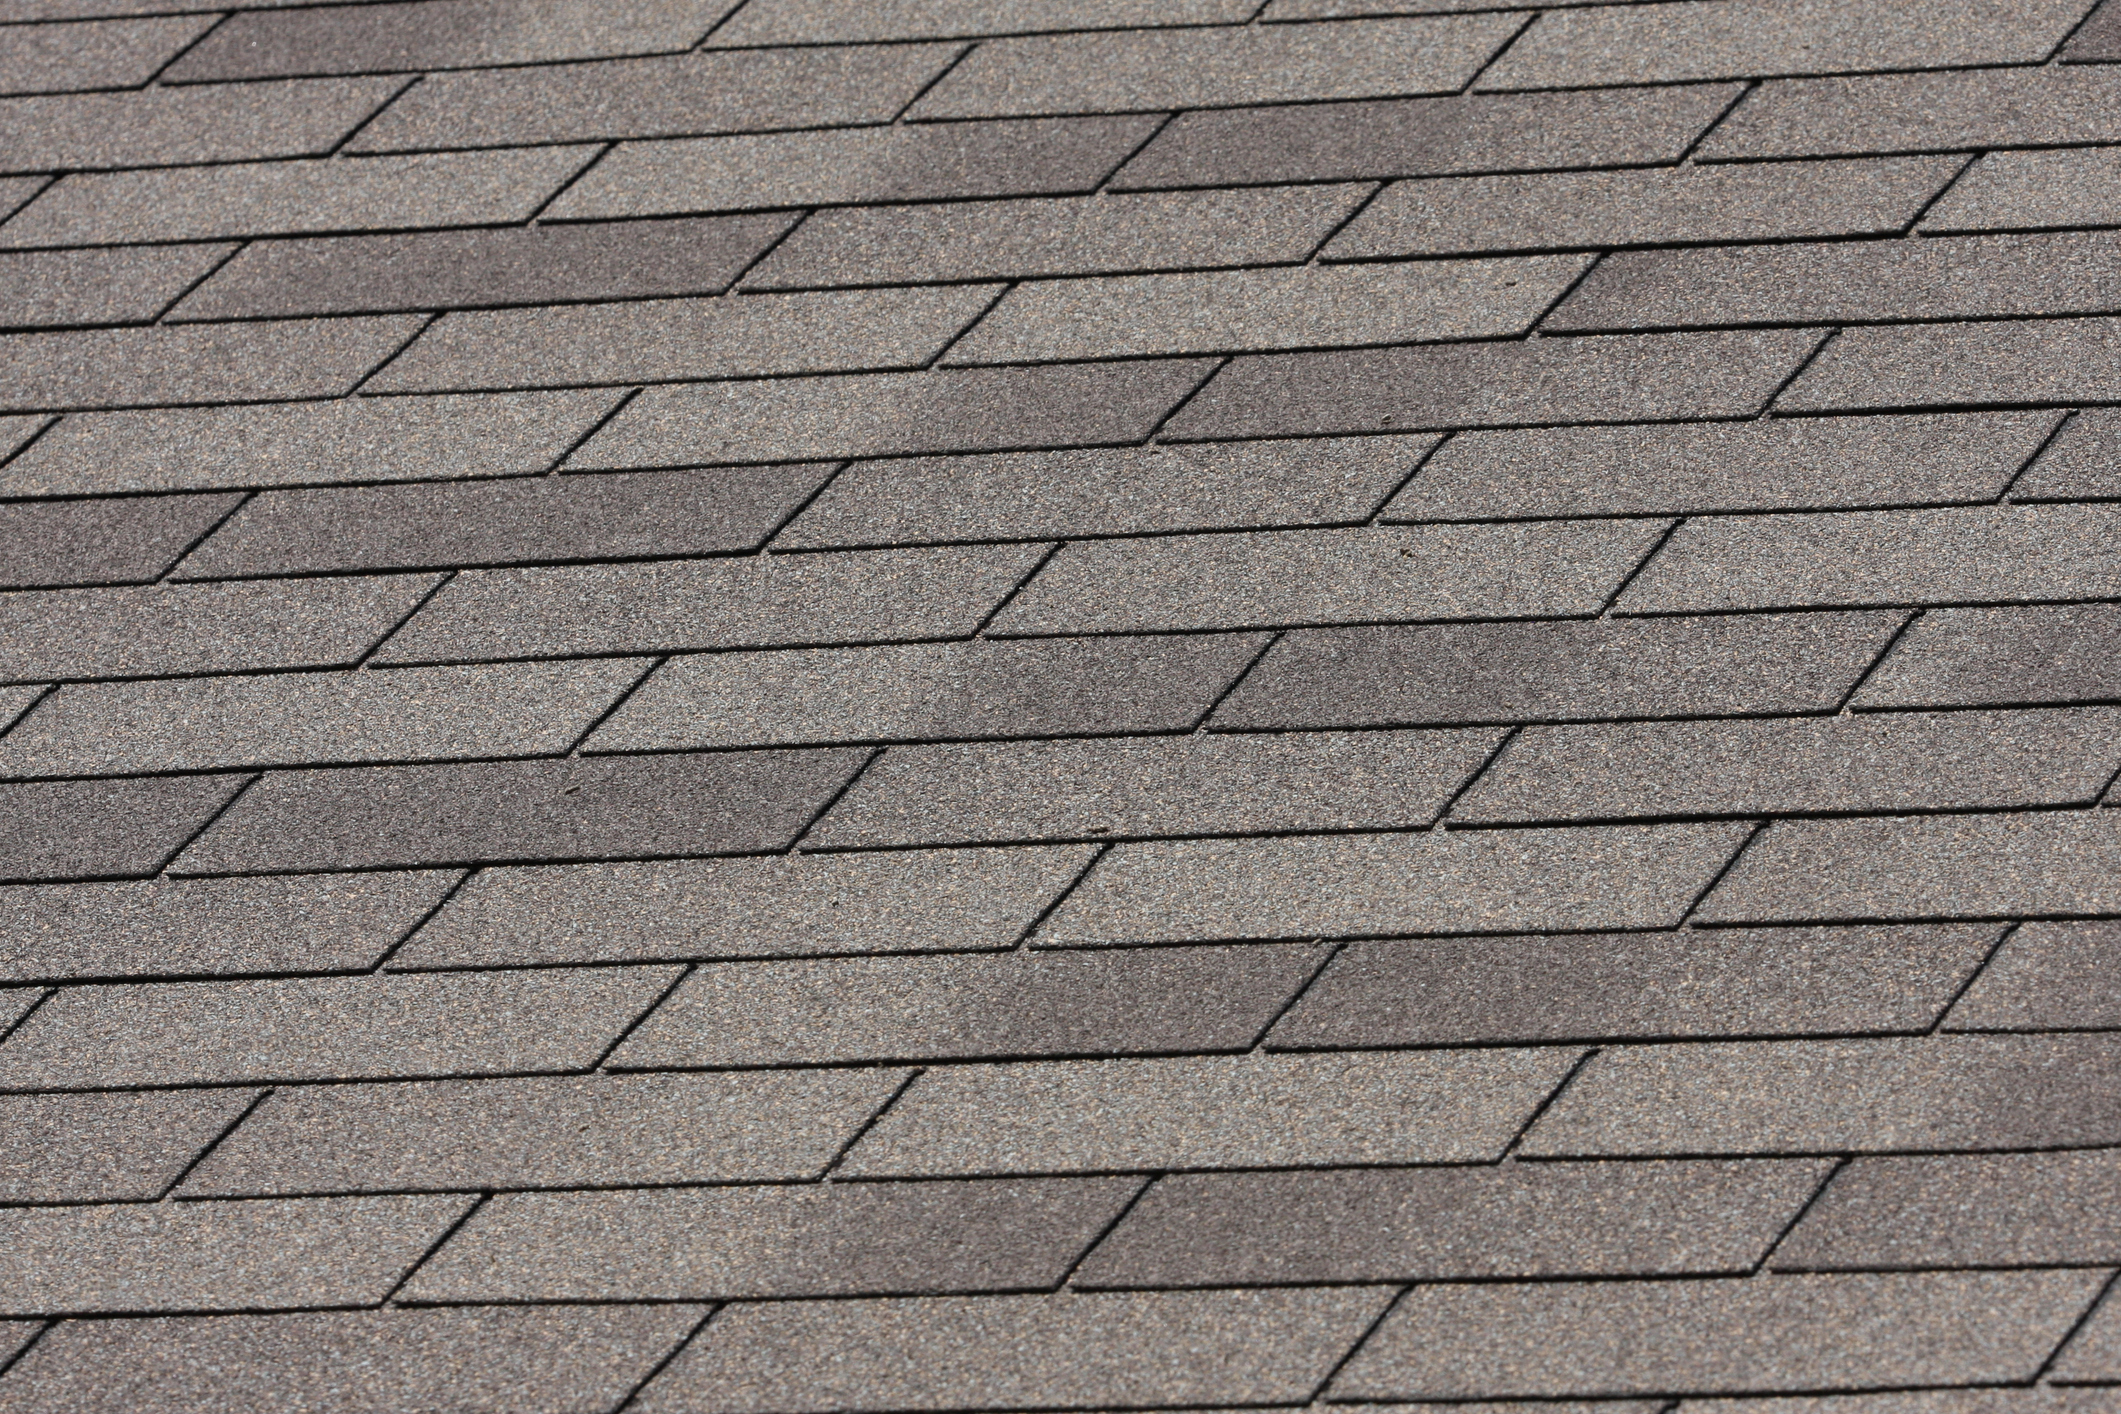 3-tab shingles are a cost-effective option for roofing.